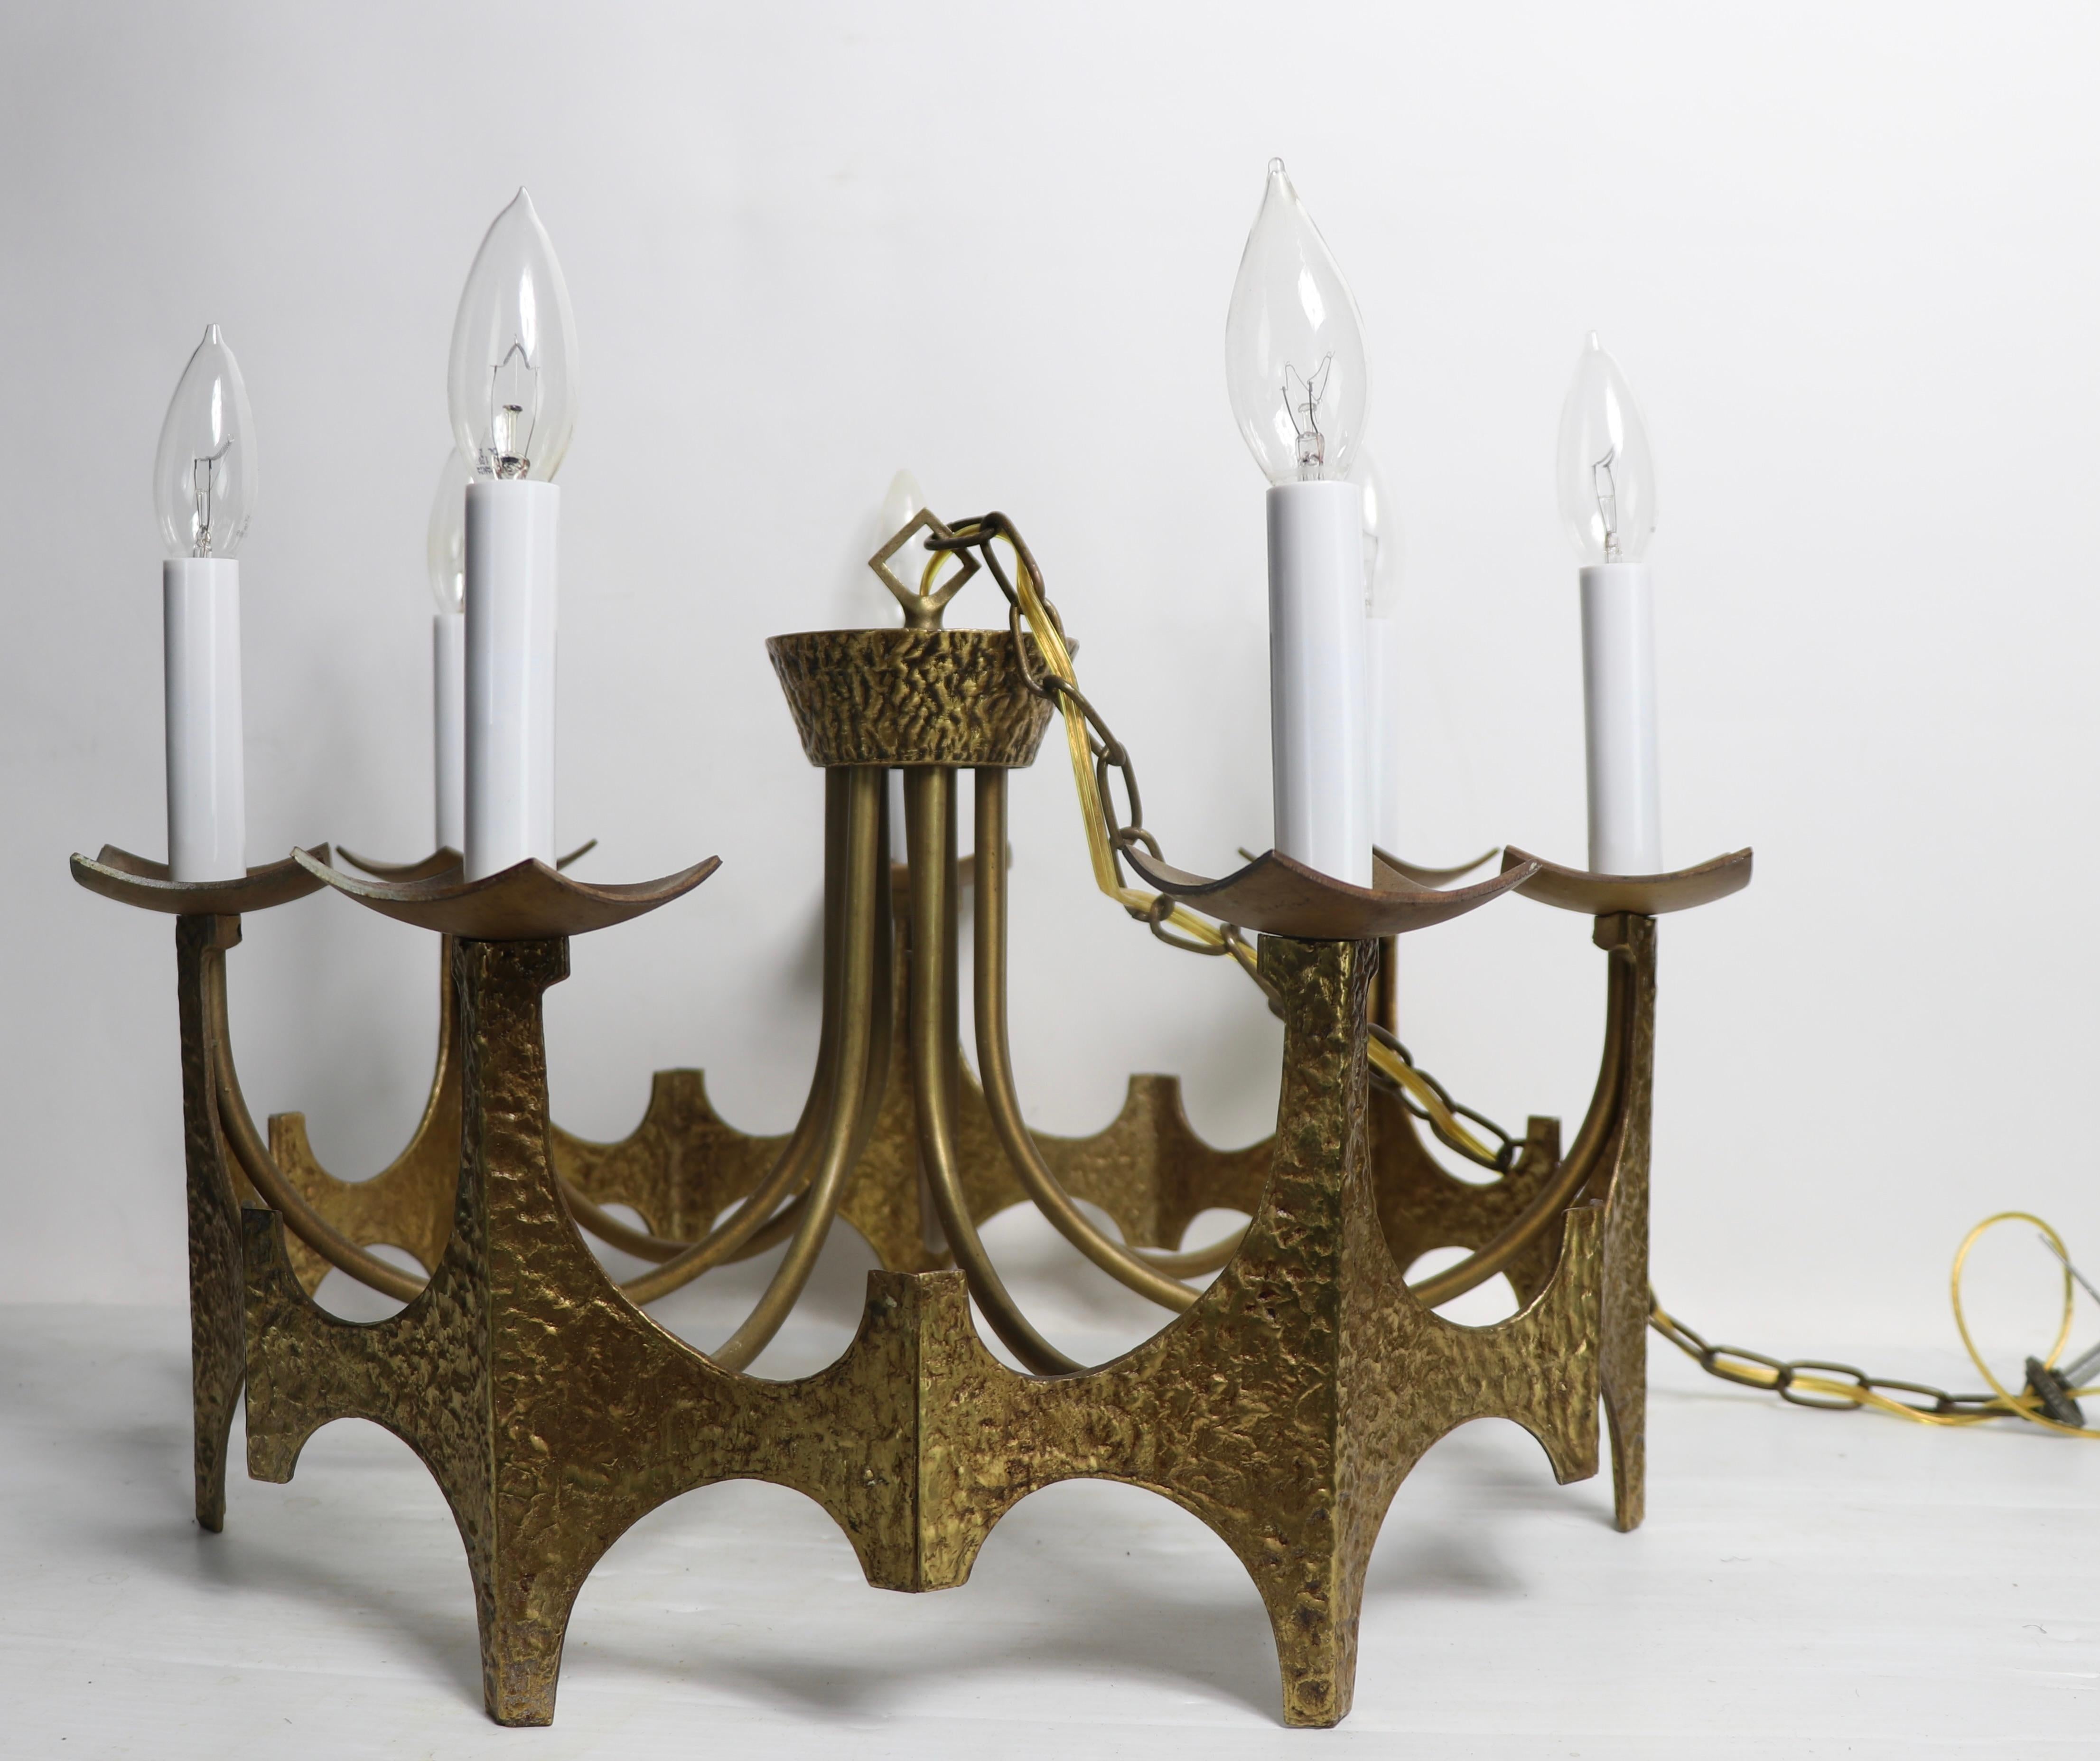 Brutalist hammered brass ring form chandelier having 7 candlestick lights. Made by noted American lighting manufacturer Moe Bridges. This example is in very good, clean and working condition, it has been newly professionally rewired. Ready to